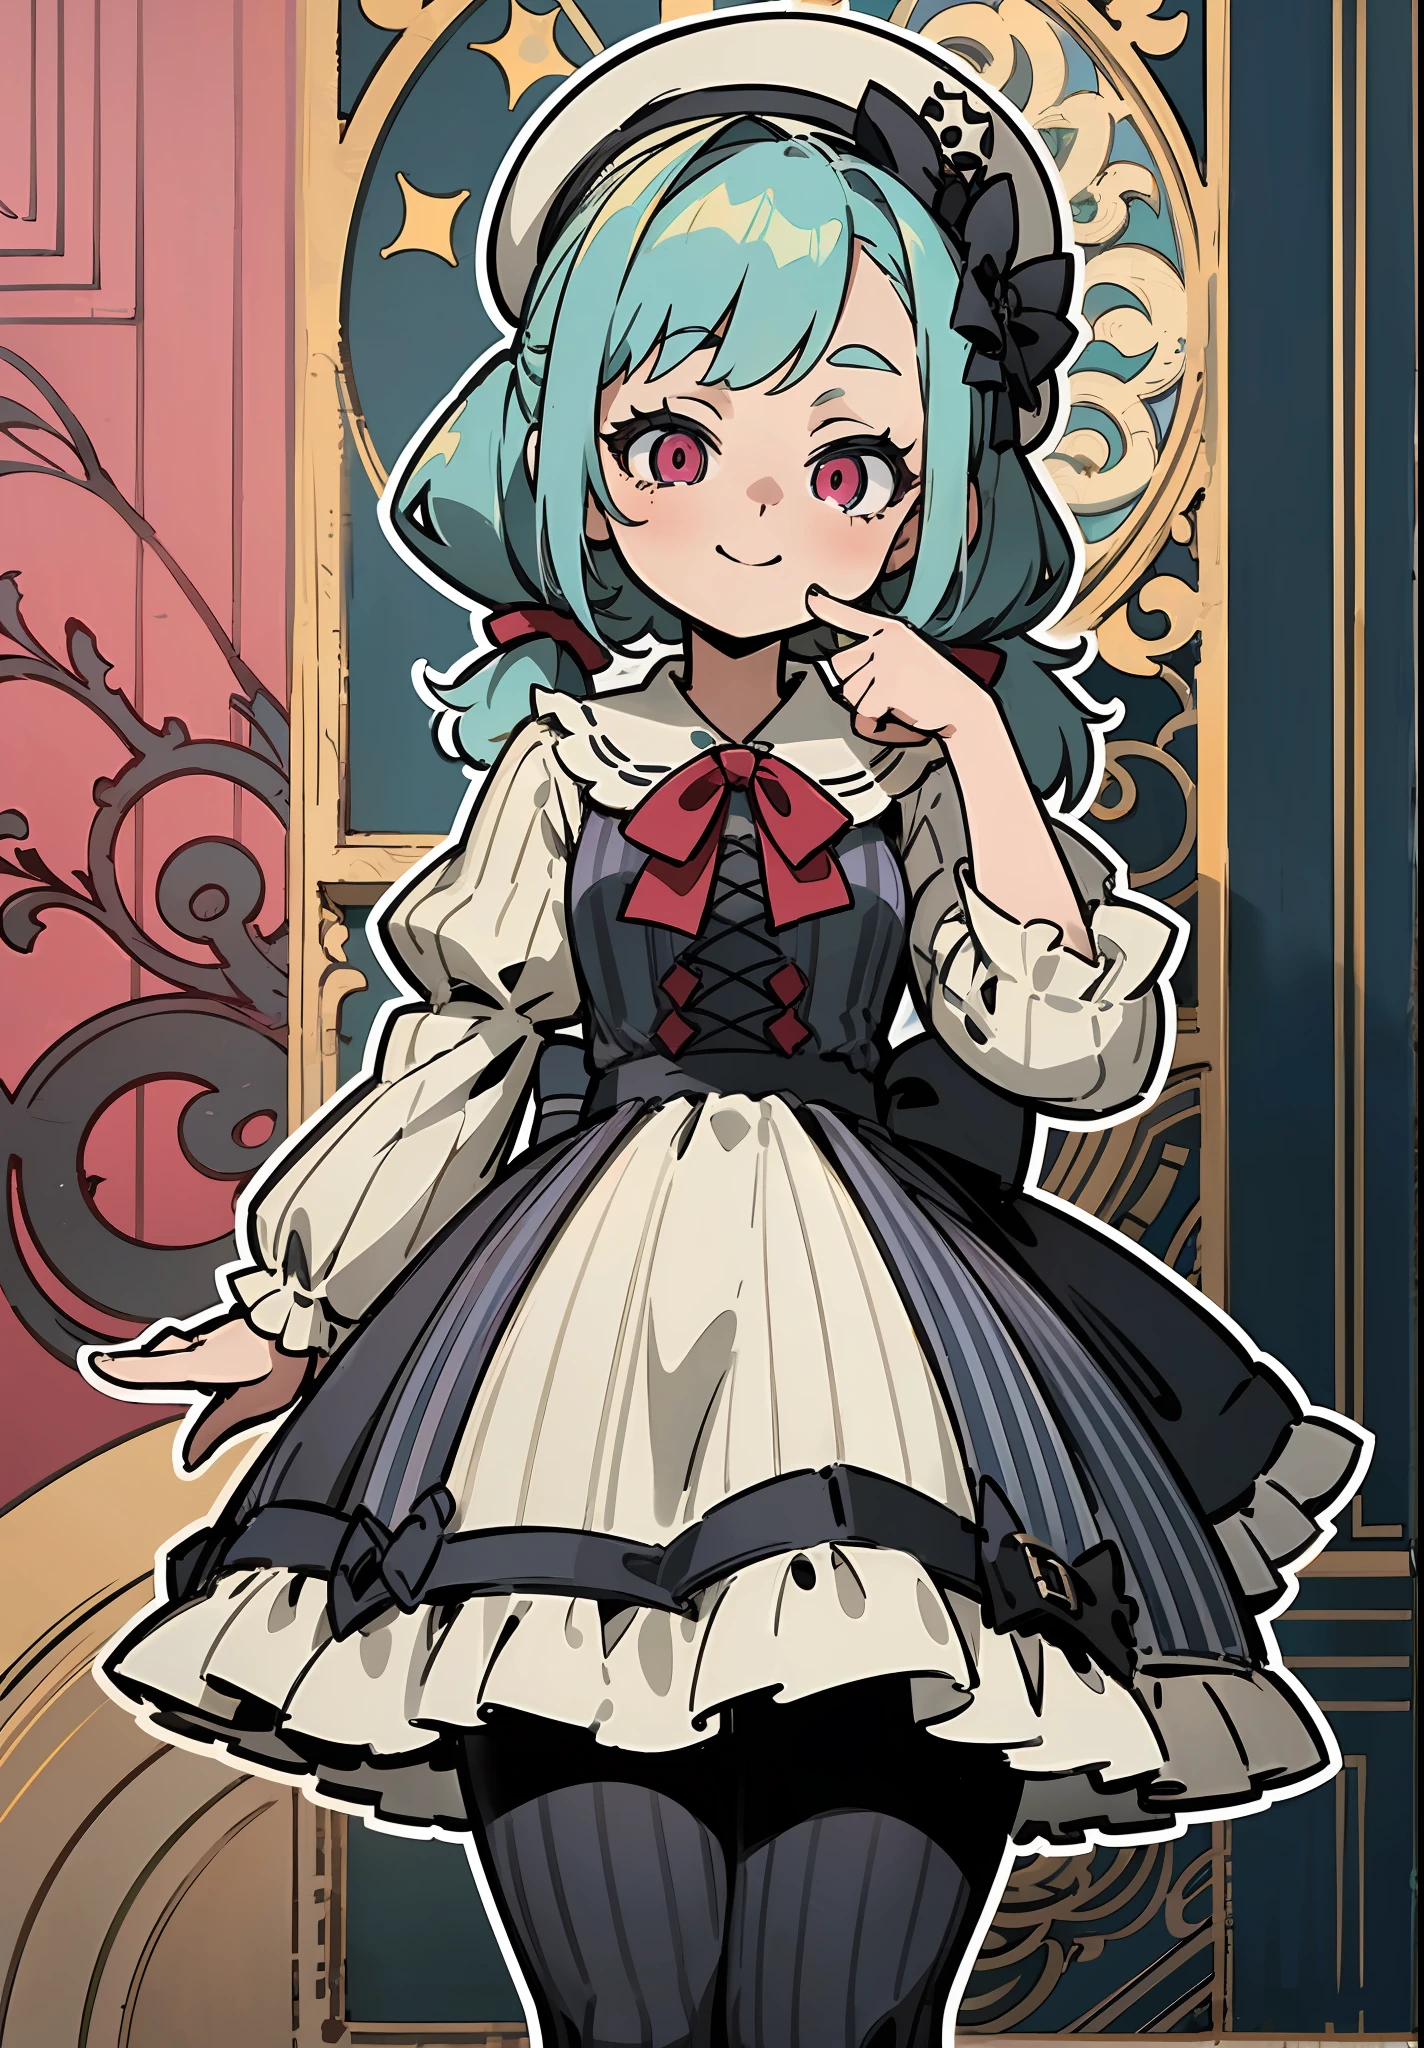 ((Dynamic Angle)), ((loli)), (child), ((solo)), (canny smile), (turquoise hair), (ponytails), (pink eyes), ((French beret)), (((smoth))), (Gothic dress), (Lolita dress), (vintage dress), (Black Dress), (frilld), (beige frill;;;;;), (Bows), ((Dark red details)), (((Vertical stripes))), ((Clock face in the background)), (library), ((thick outlines)), ((white outlines))